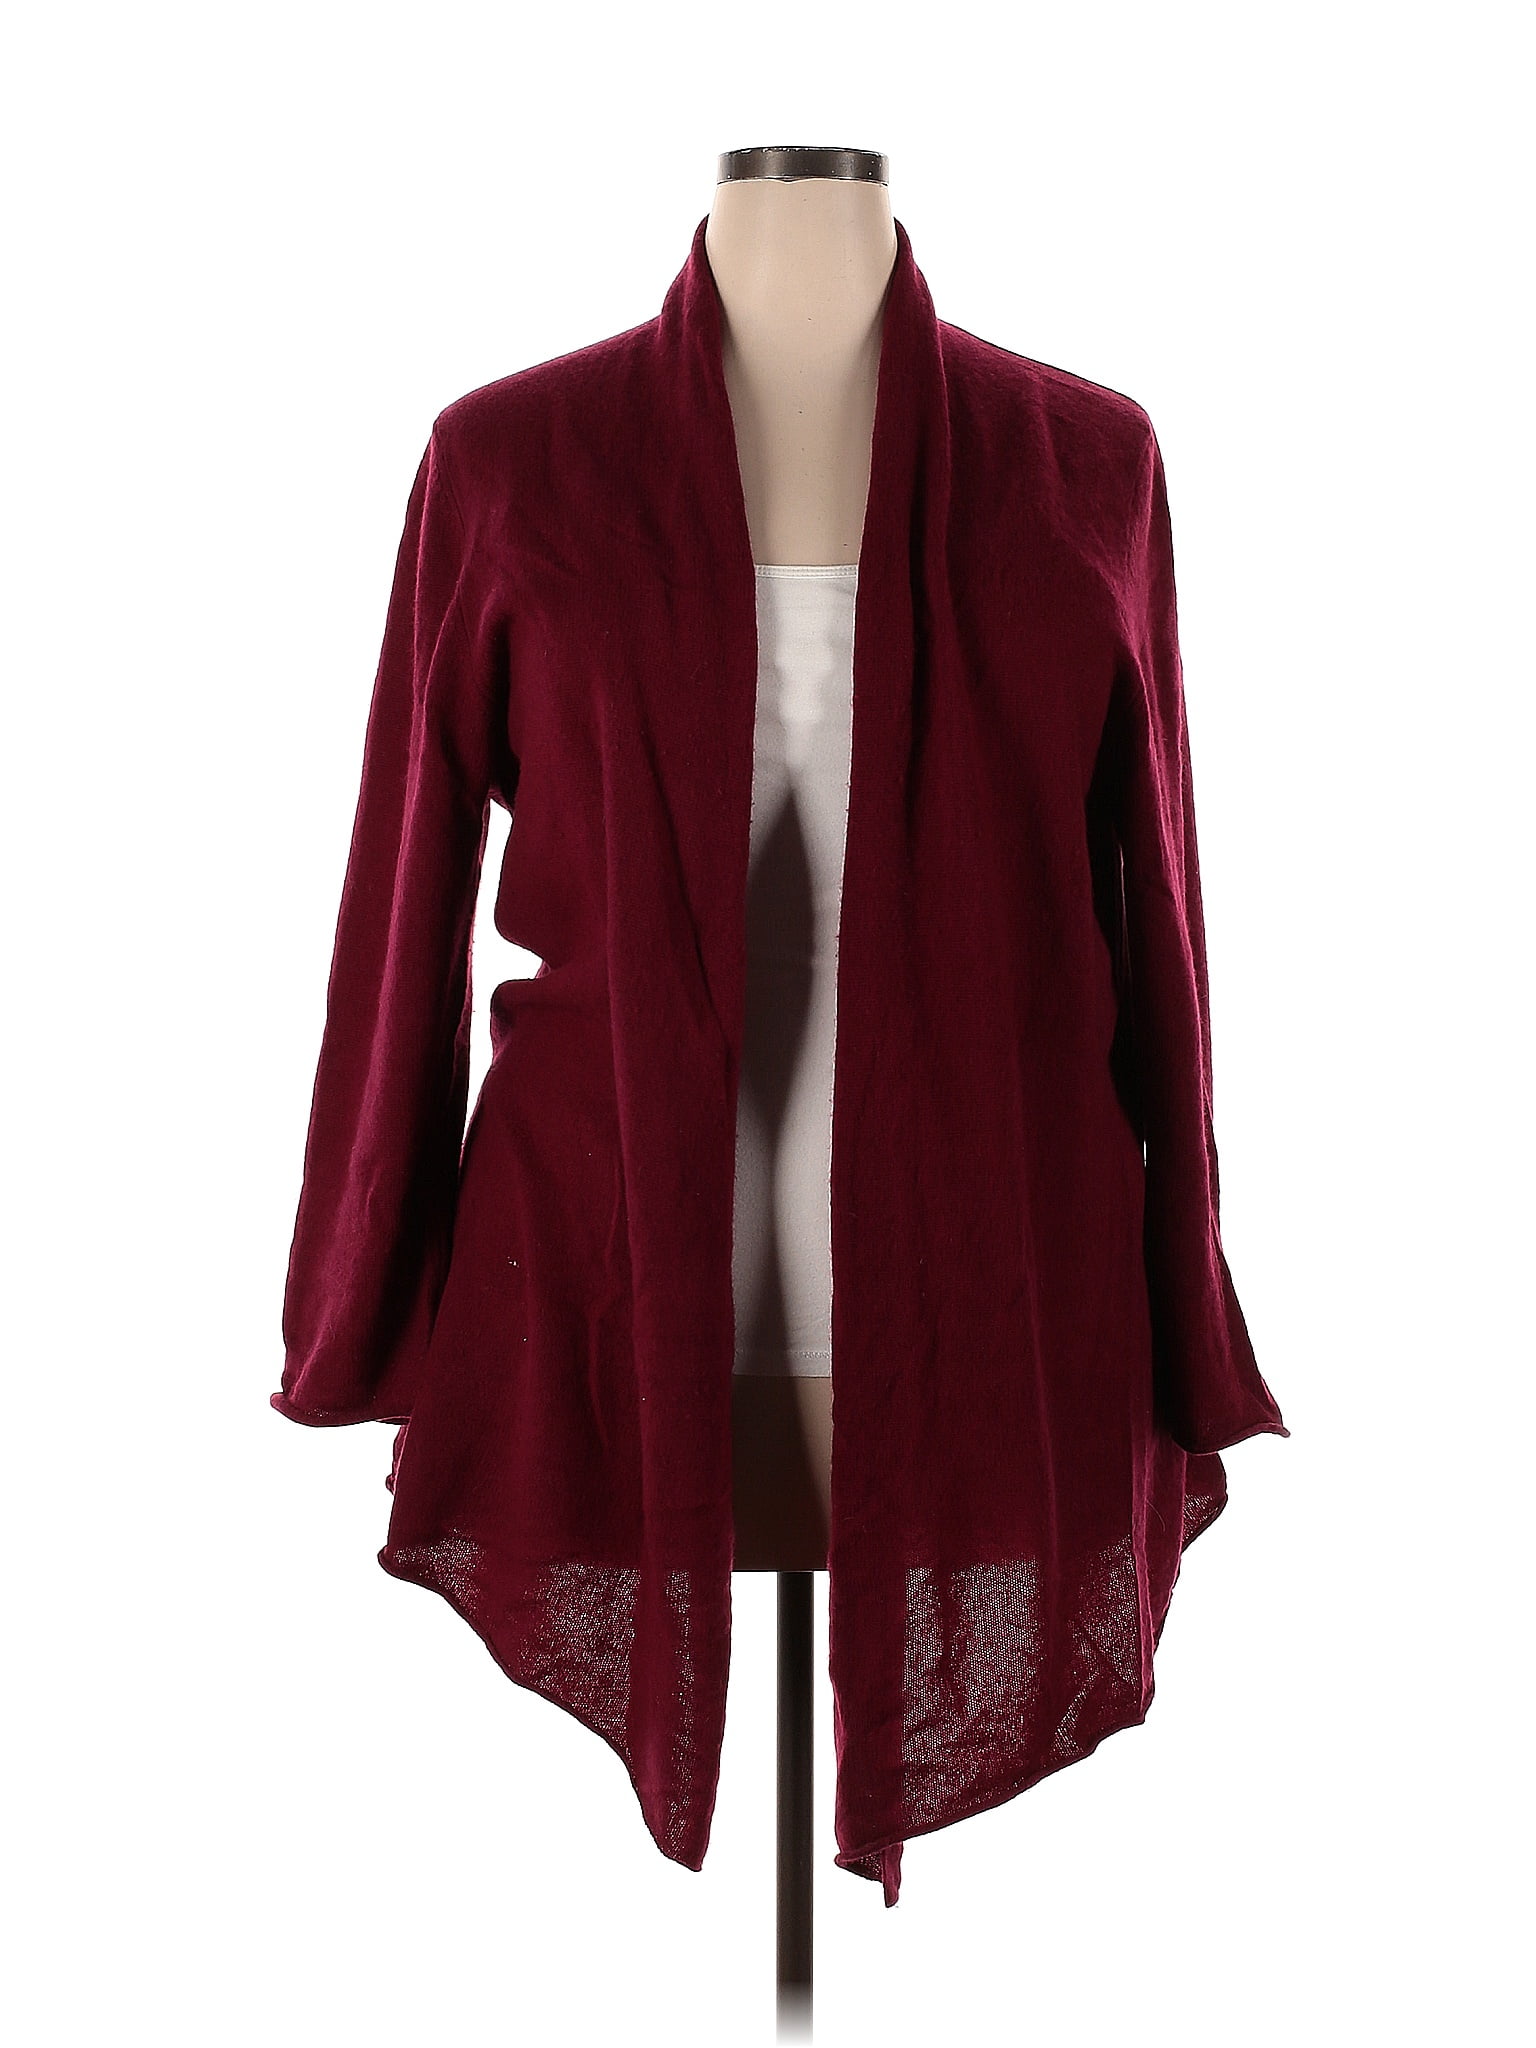 Lusso 100% Cashmere Color Block Solid Maroon Burgundy Cardigan Size 2X ...